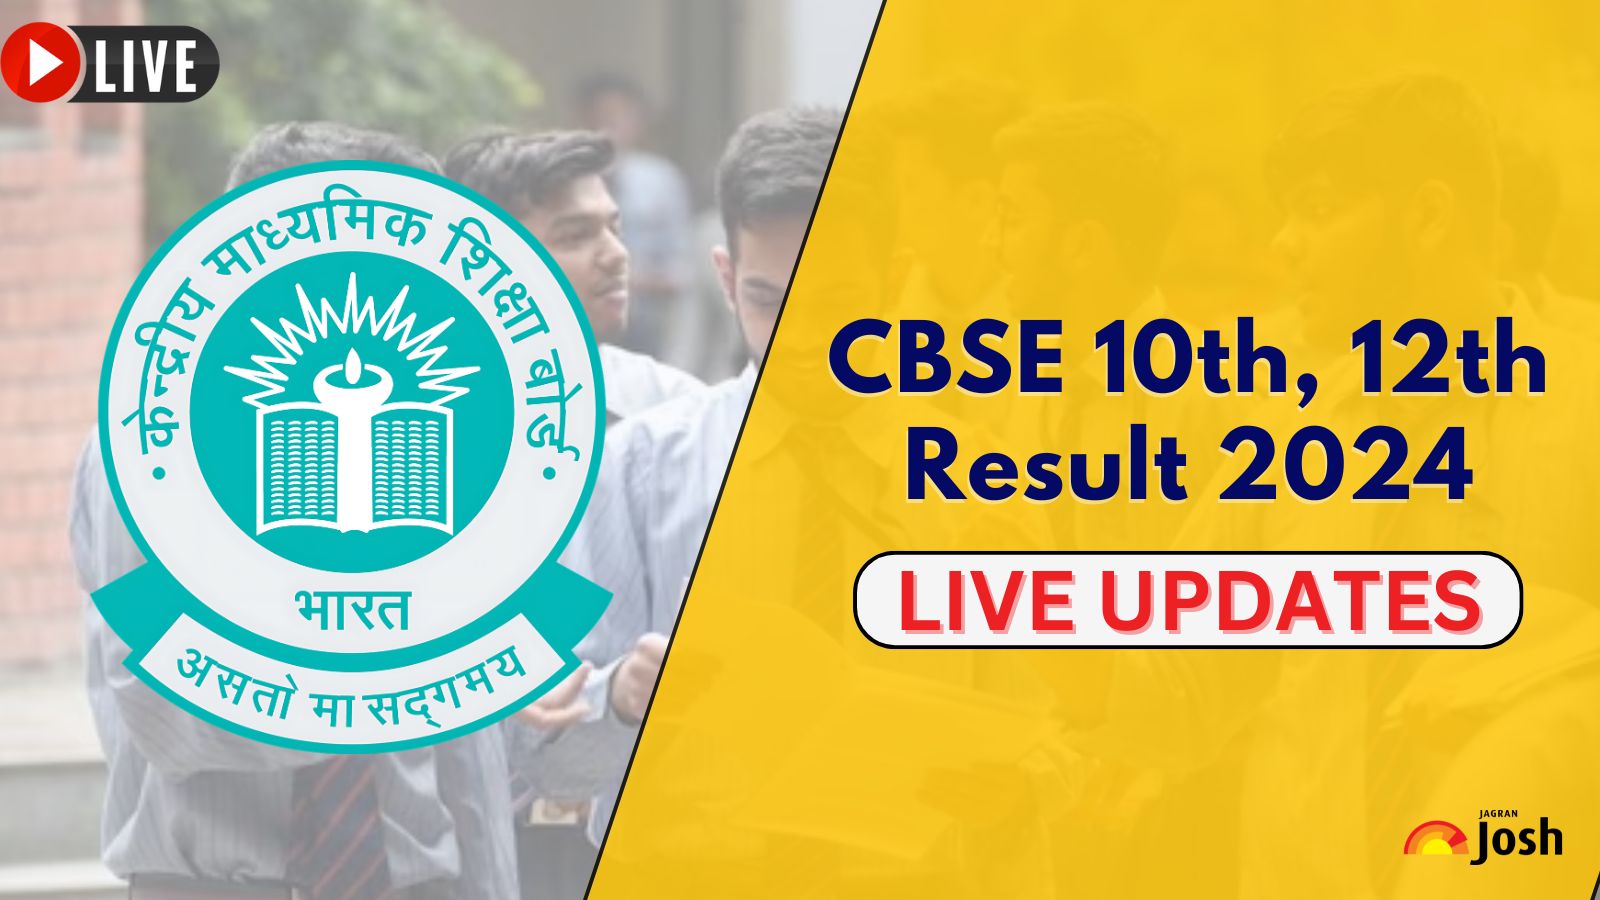 CBSE Result 2024 Date LIVE Updates: 10th, 12th Result TOMORROW? Check Expected Date and Time